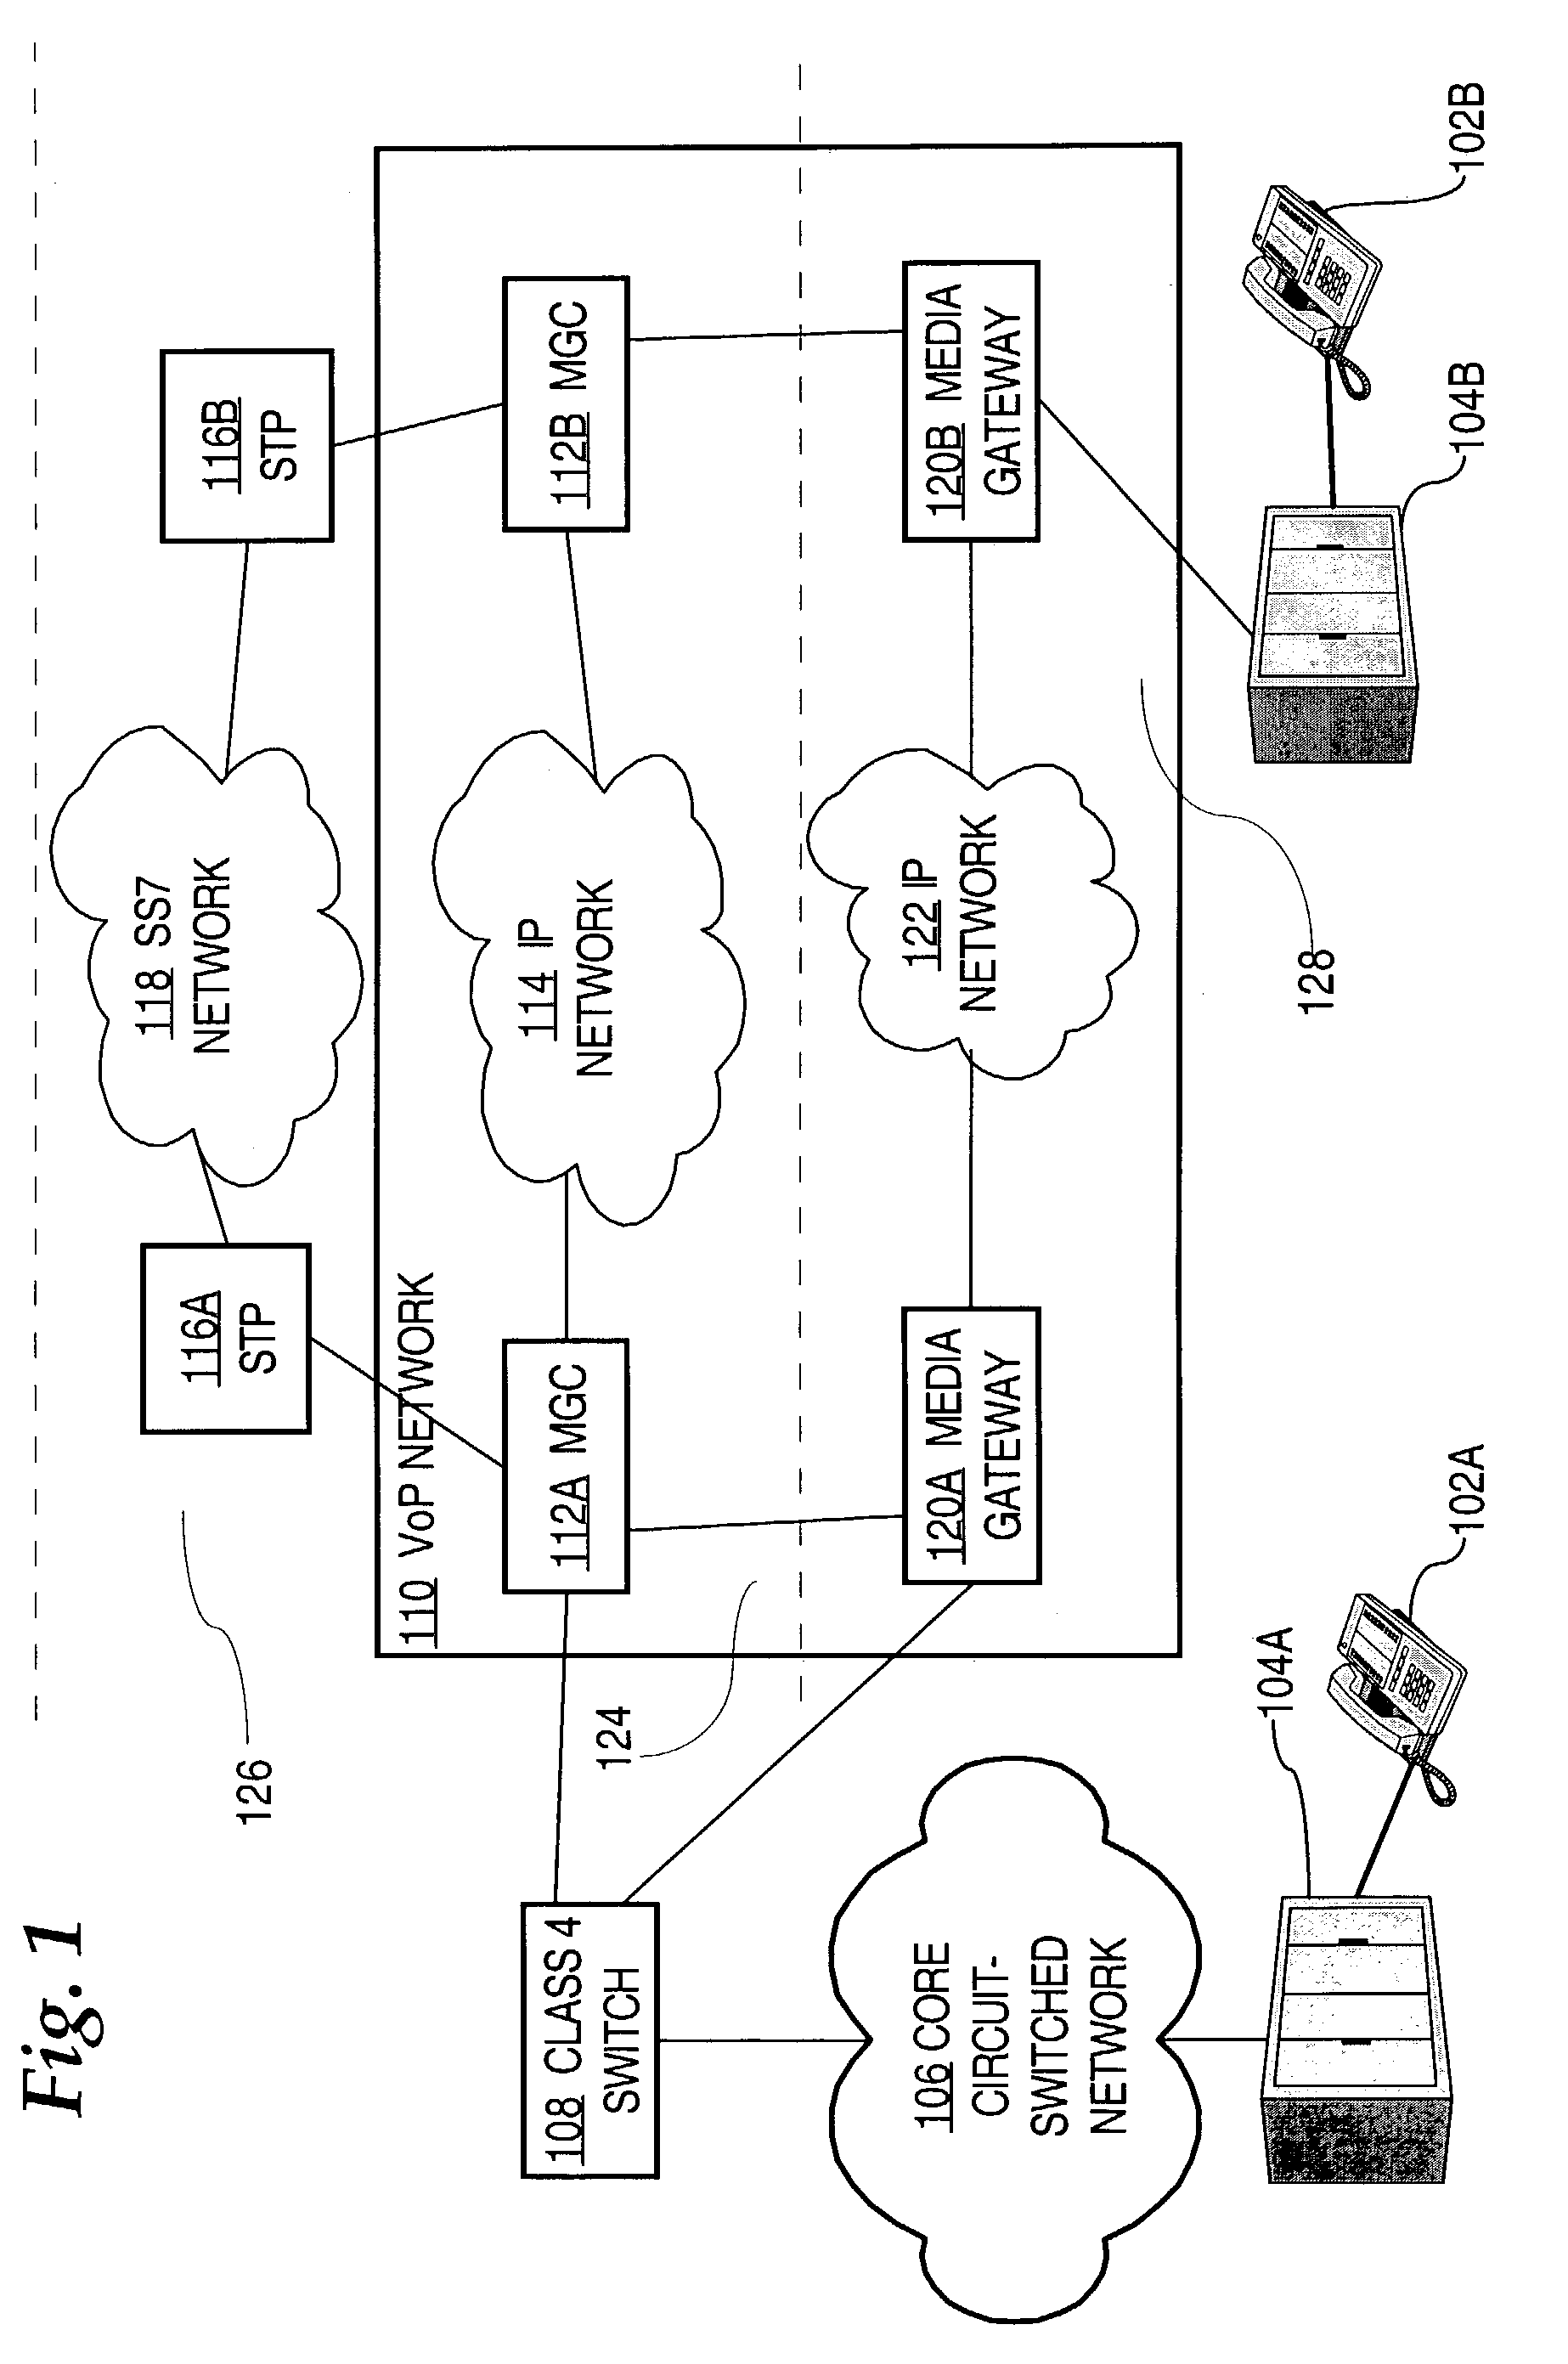 Automatically discovering management information about services in a communication network